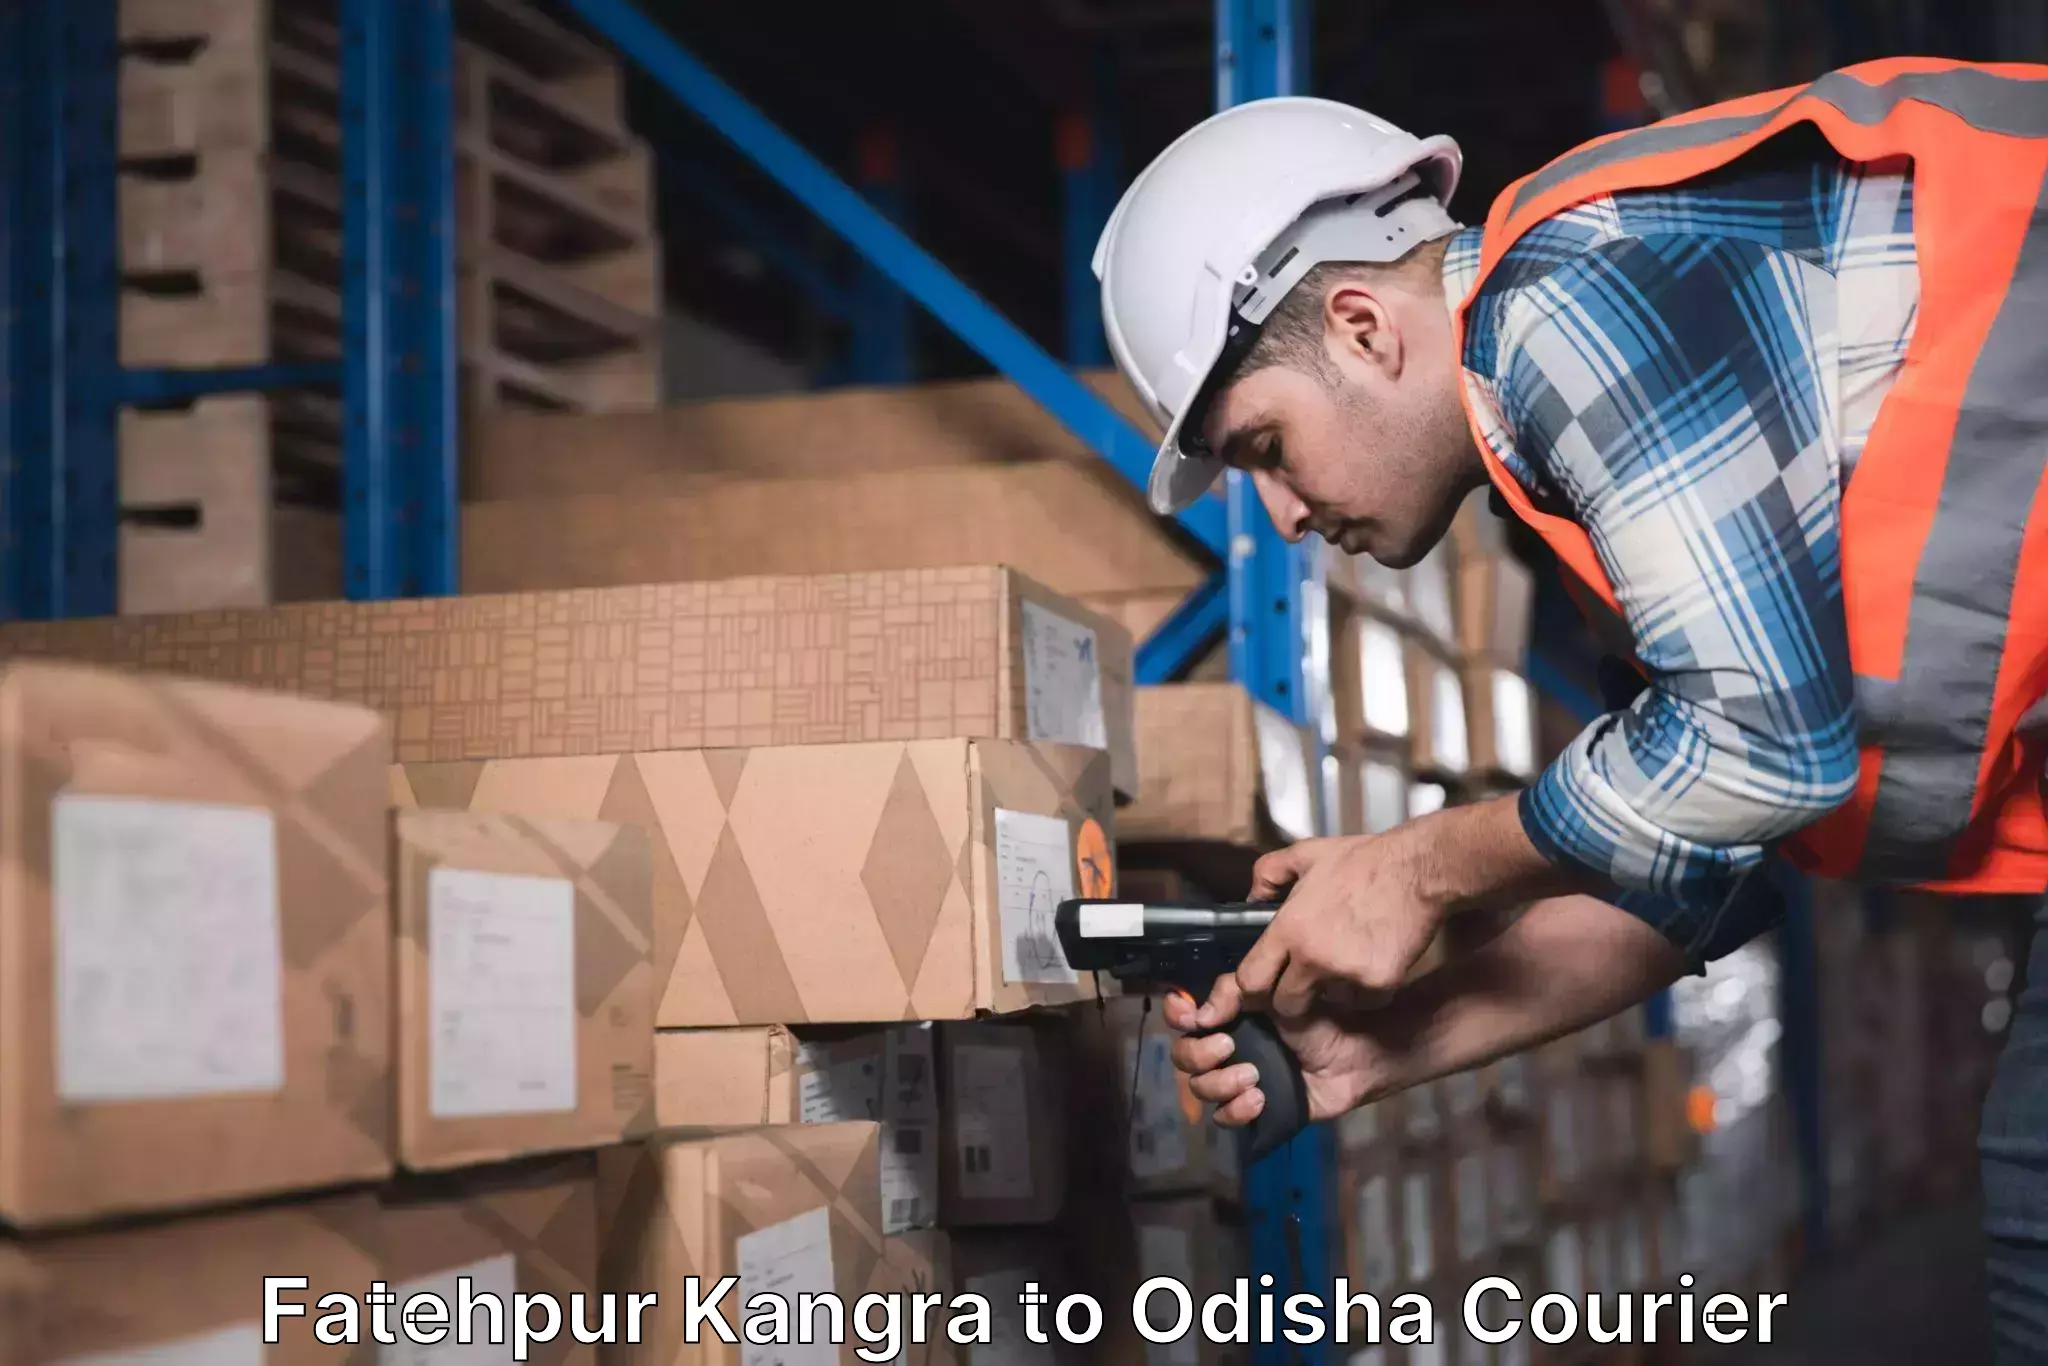 Global courier networks Fatehpur Kangra to Pipili